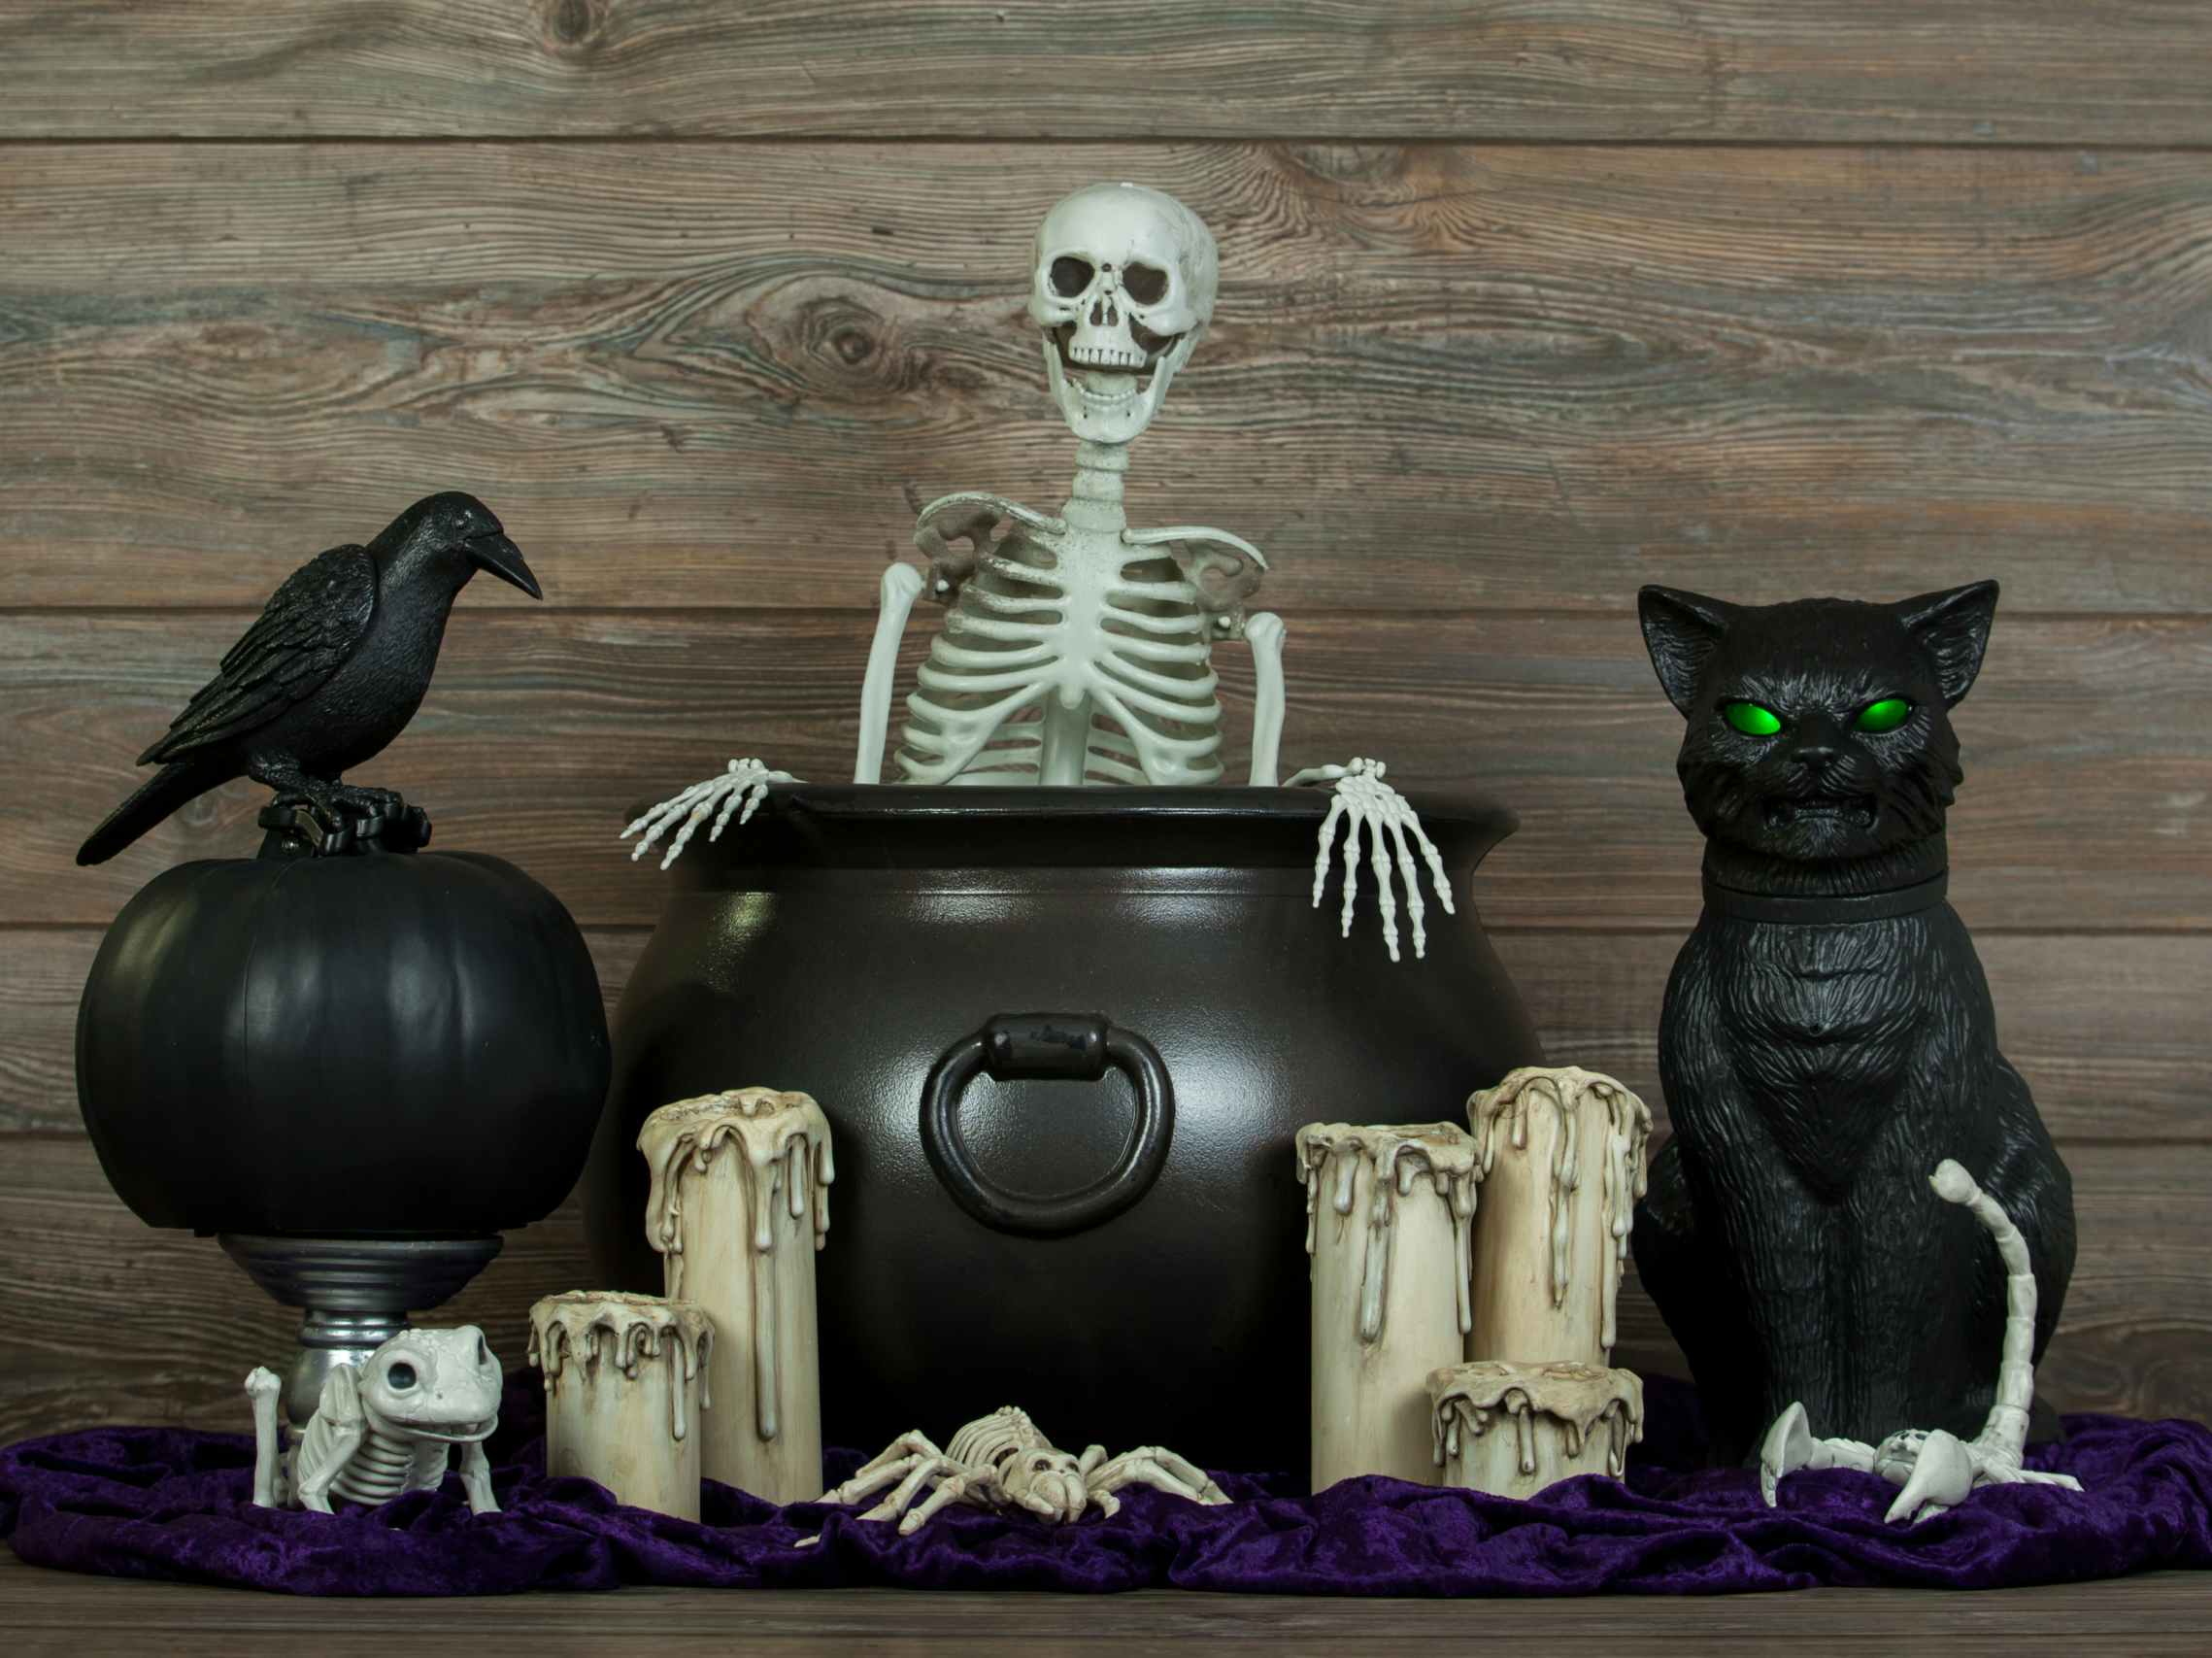 Halloween decorations grouped together on a table including a cauldron, a skeleton, a crow, a black cat, some candles, and more.